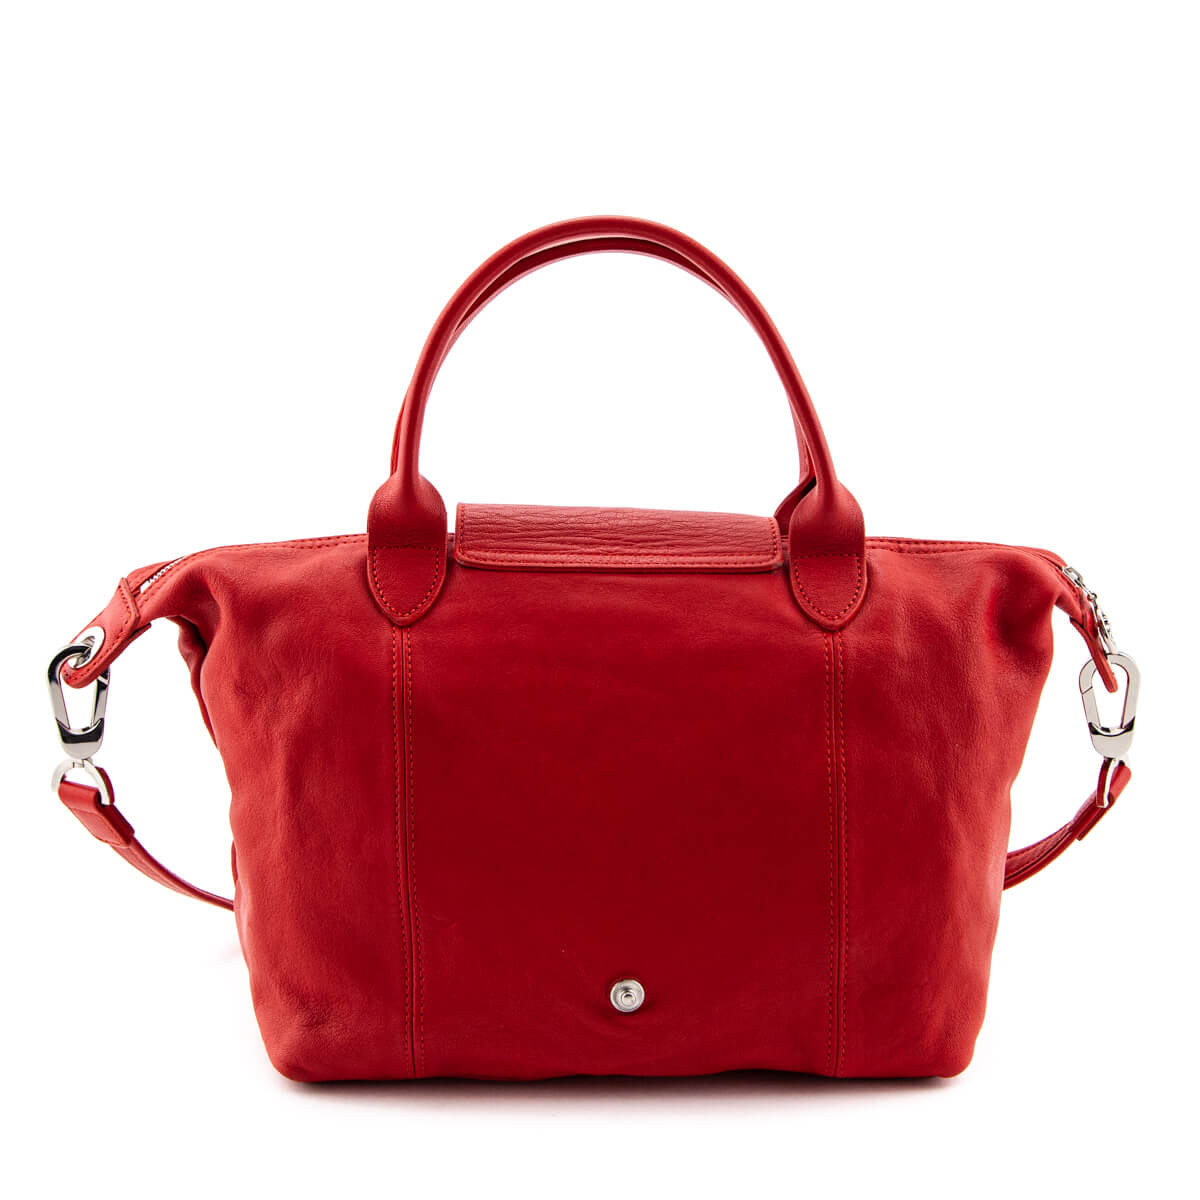 Longchamp X-small Le Pliage Cuir Convertible Top Handle Bag in Red